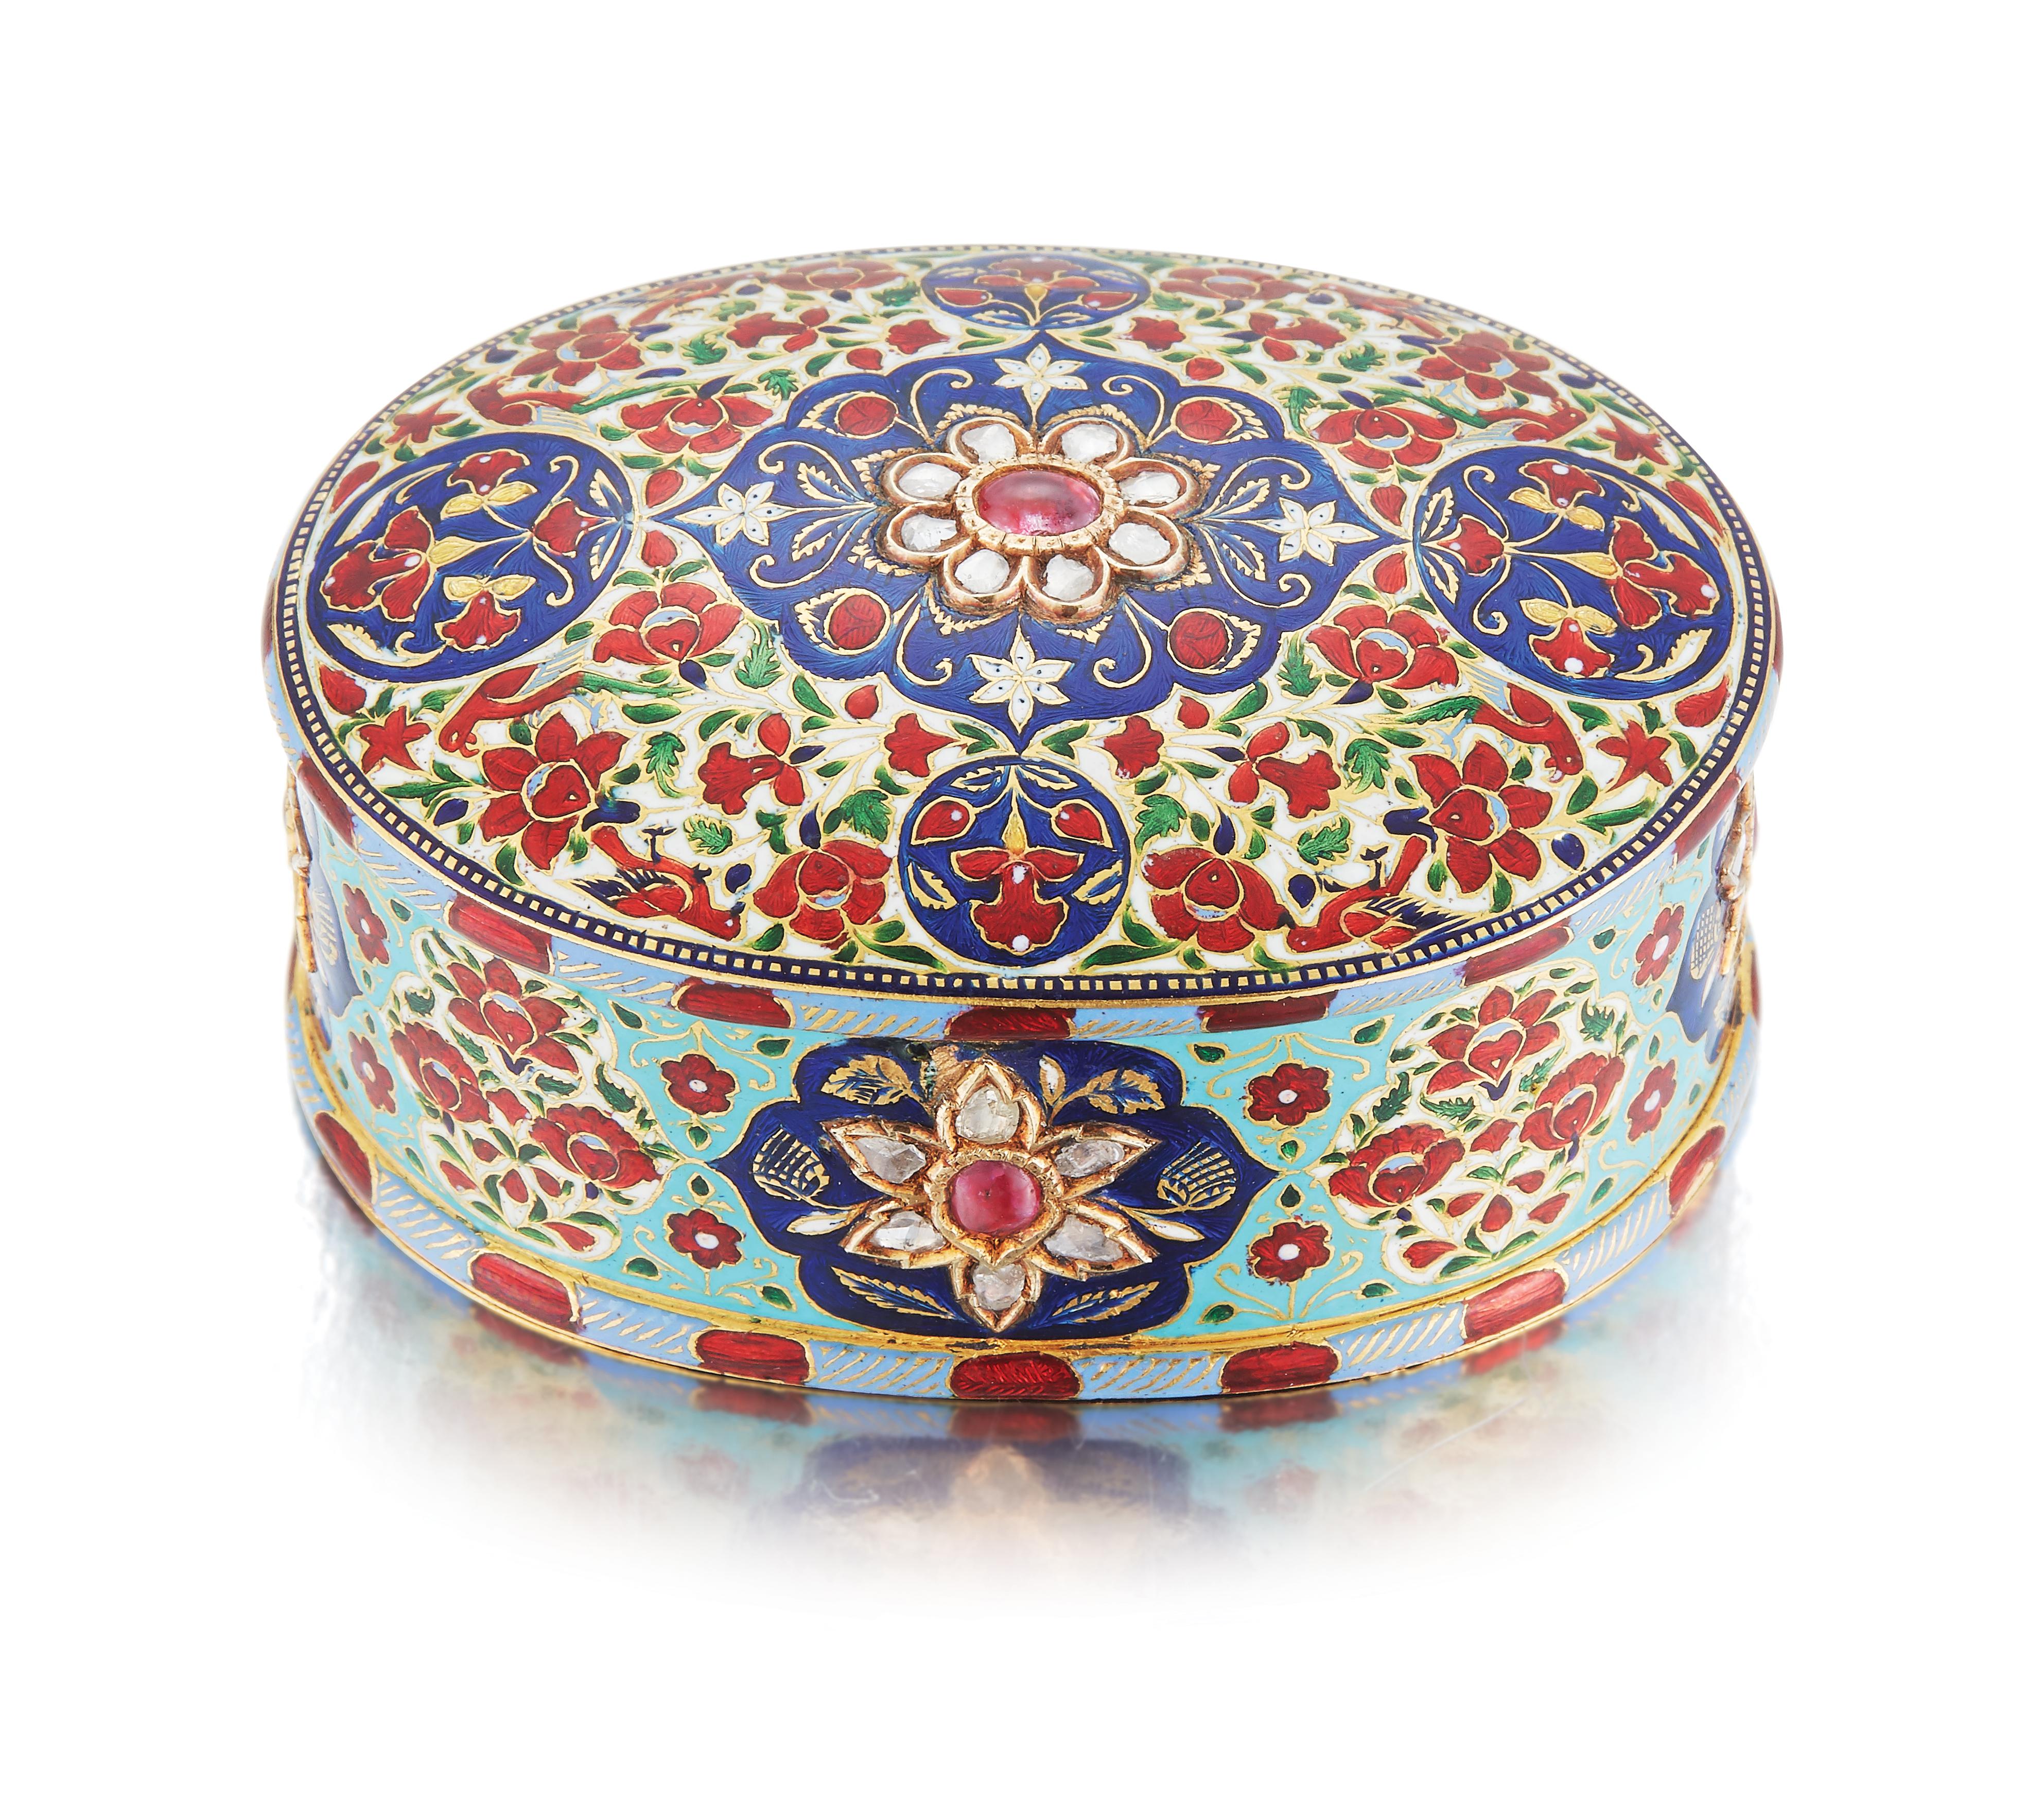 19th century Indian enamel gold box

Set with polki diamonds

Dimensions: approximately 2.63 x 1.88 inches

Weight: 175.7 grams

Circa 1850.